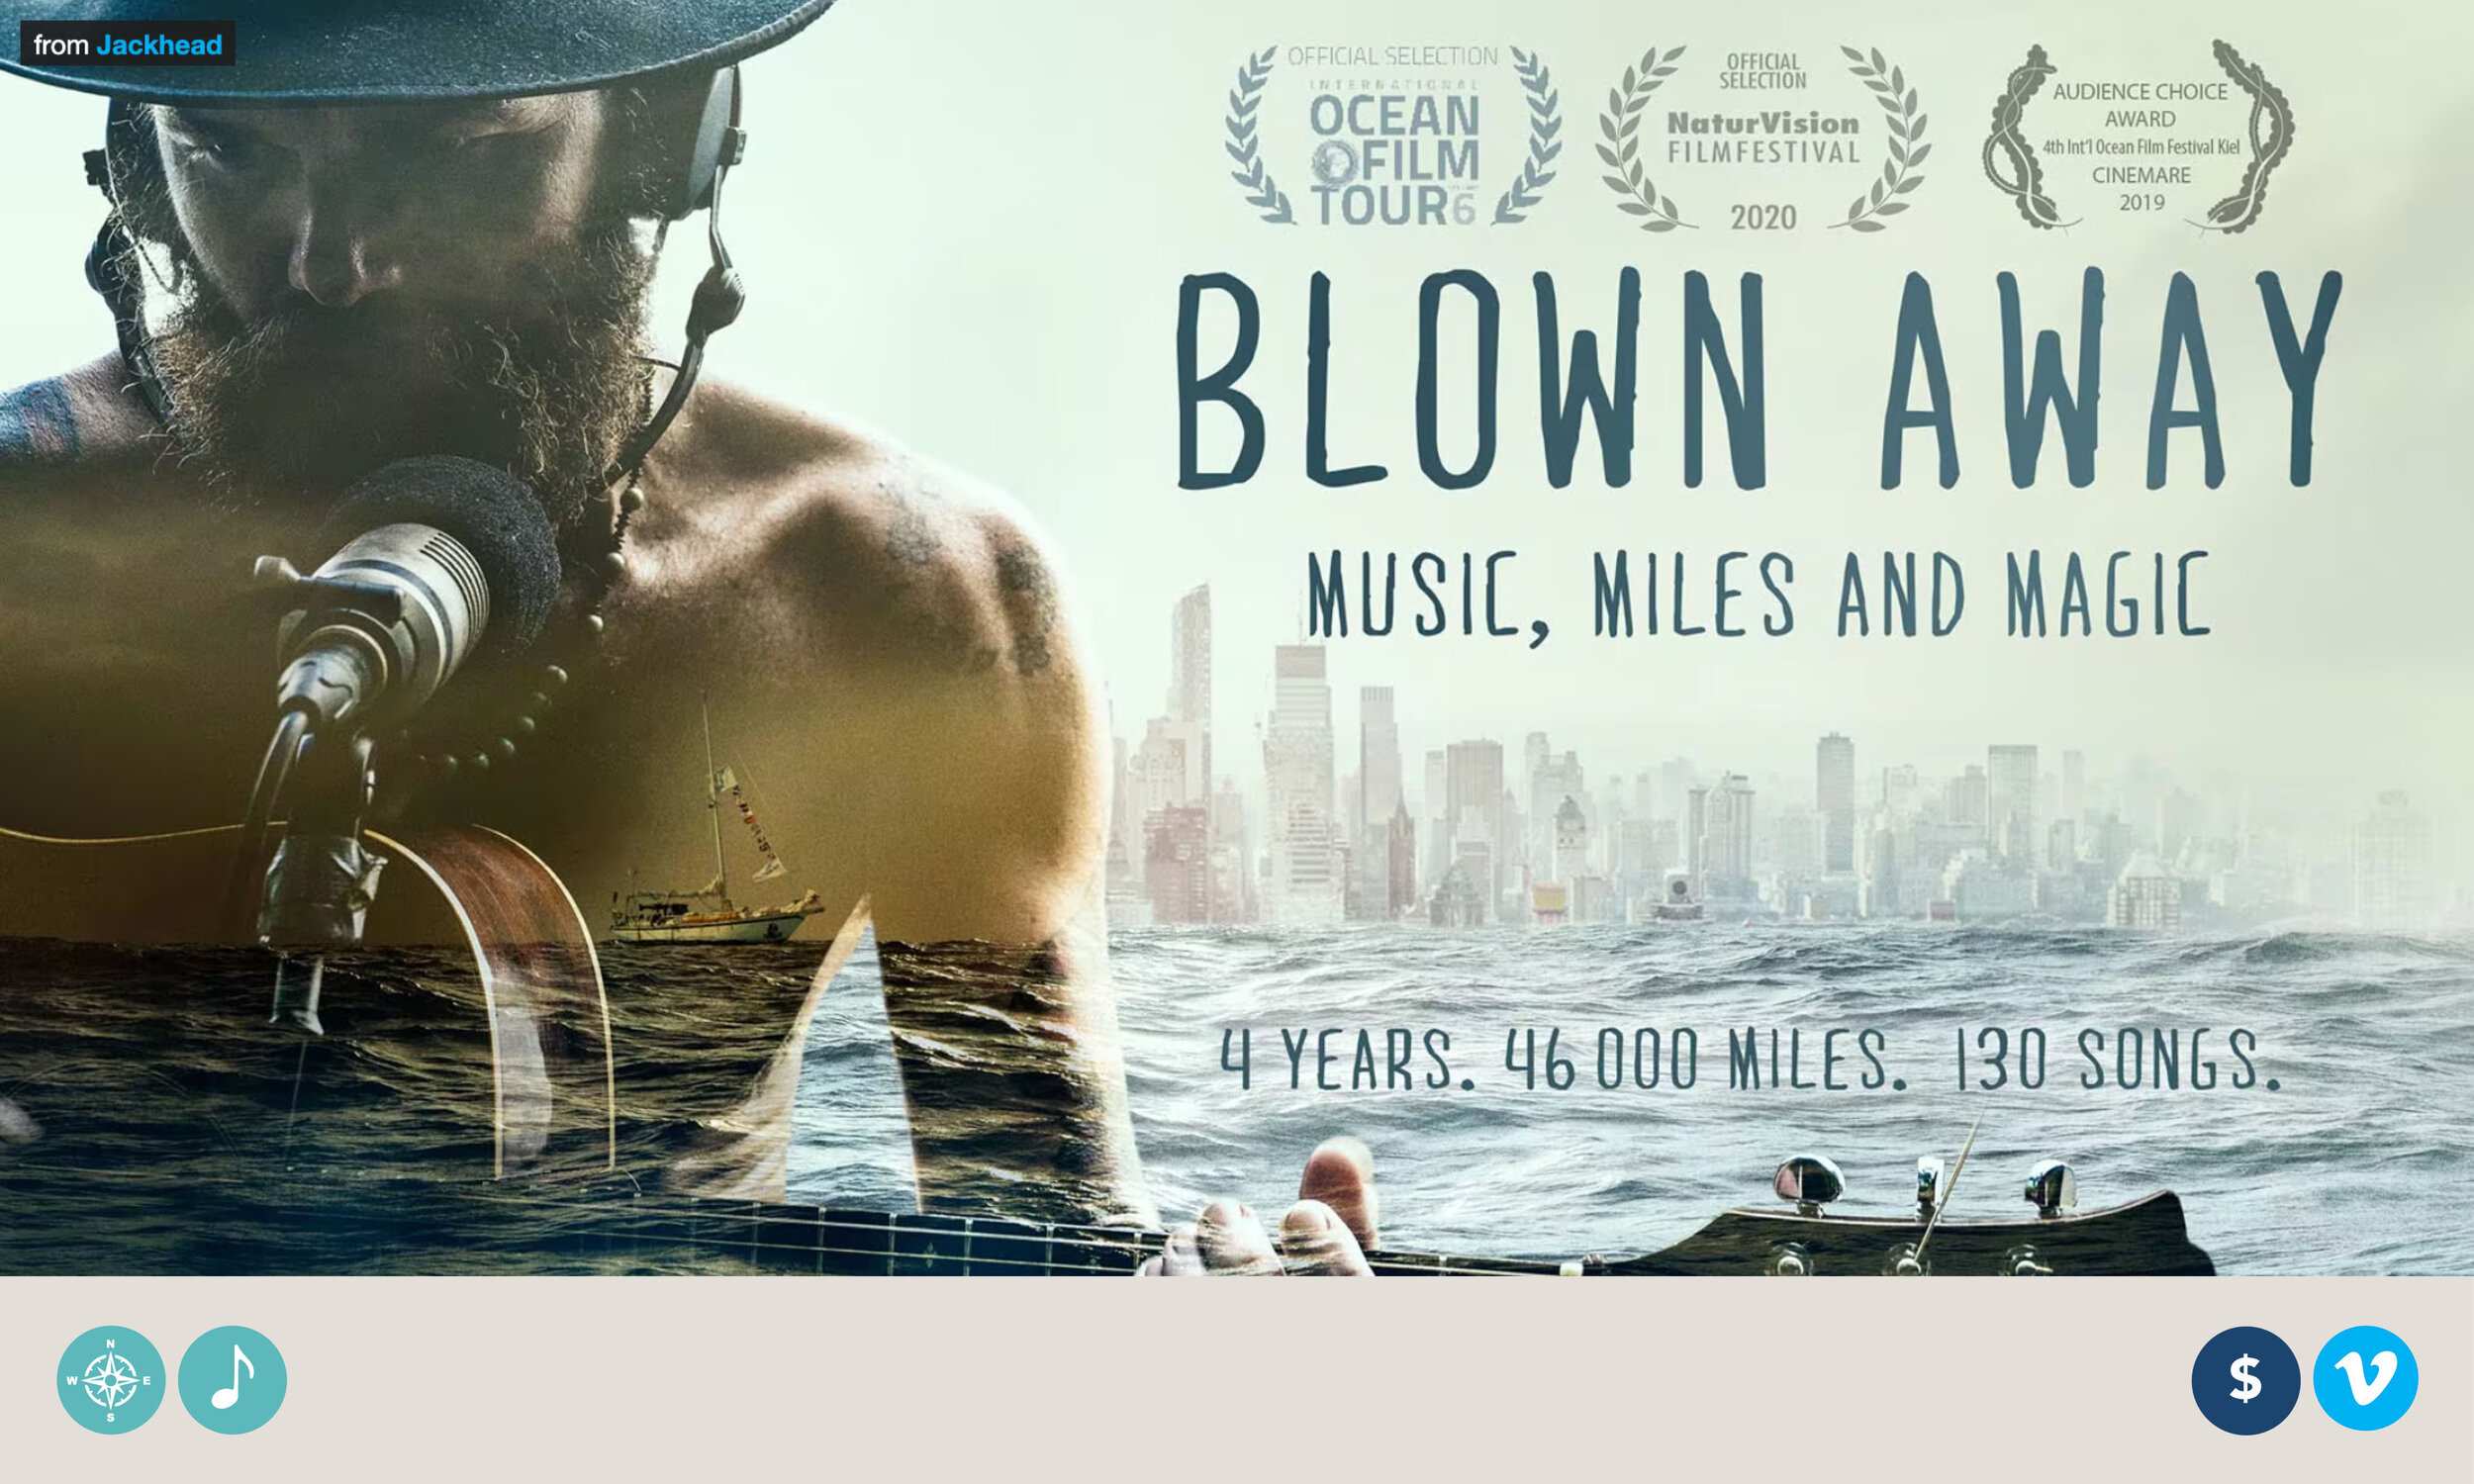 Blown Away is an authentic and inspiring sailing film